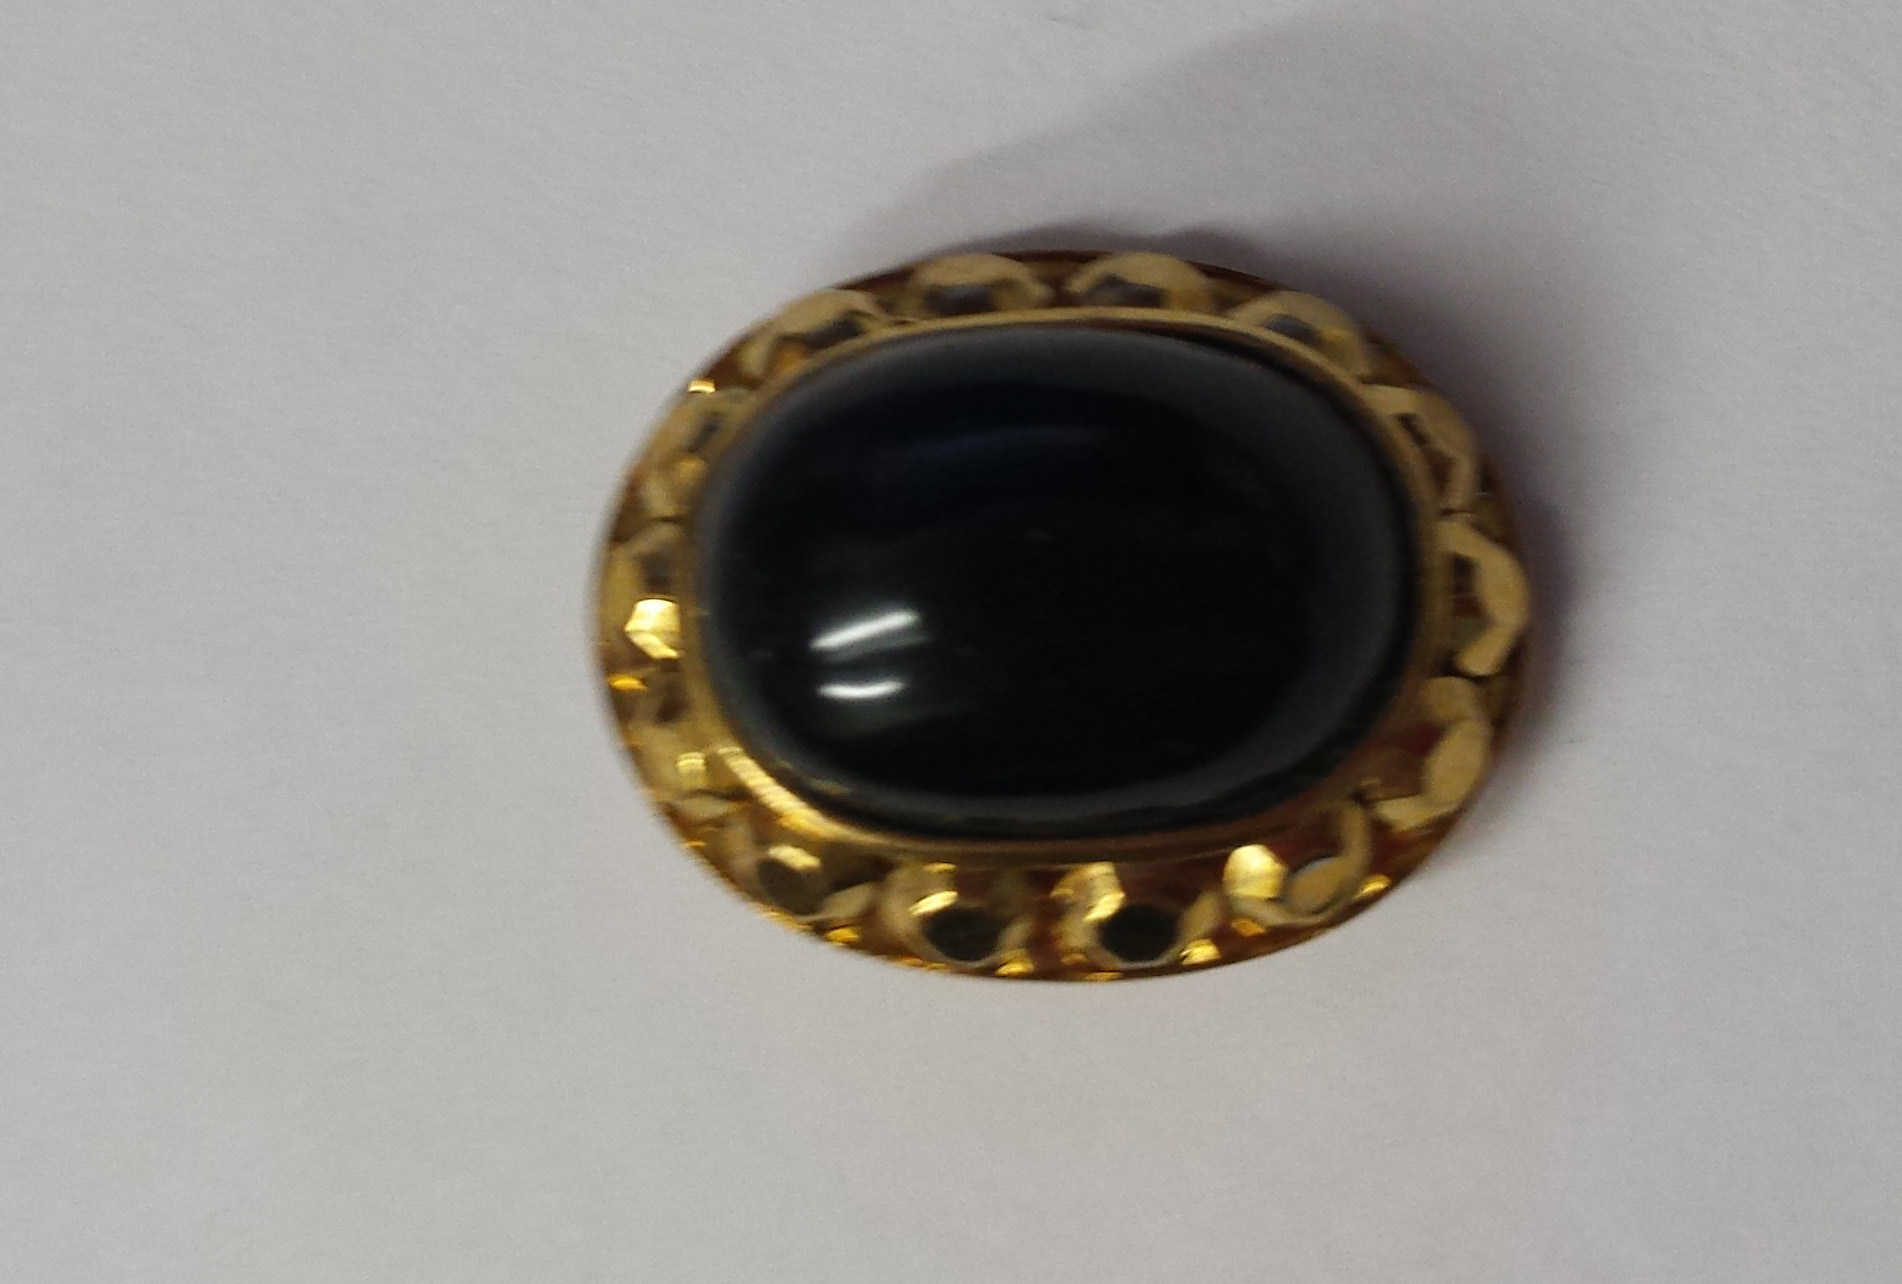 Black with Gold Surround Oval Dazzle Button - 1 inch by 3/4 inch #56006